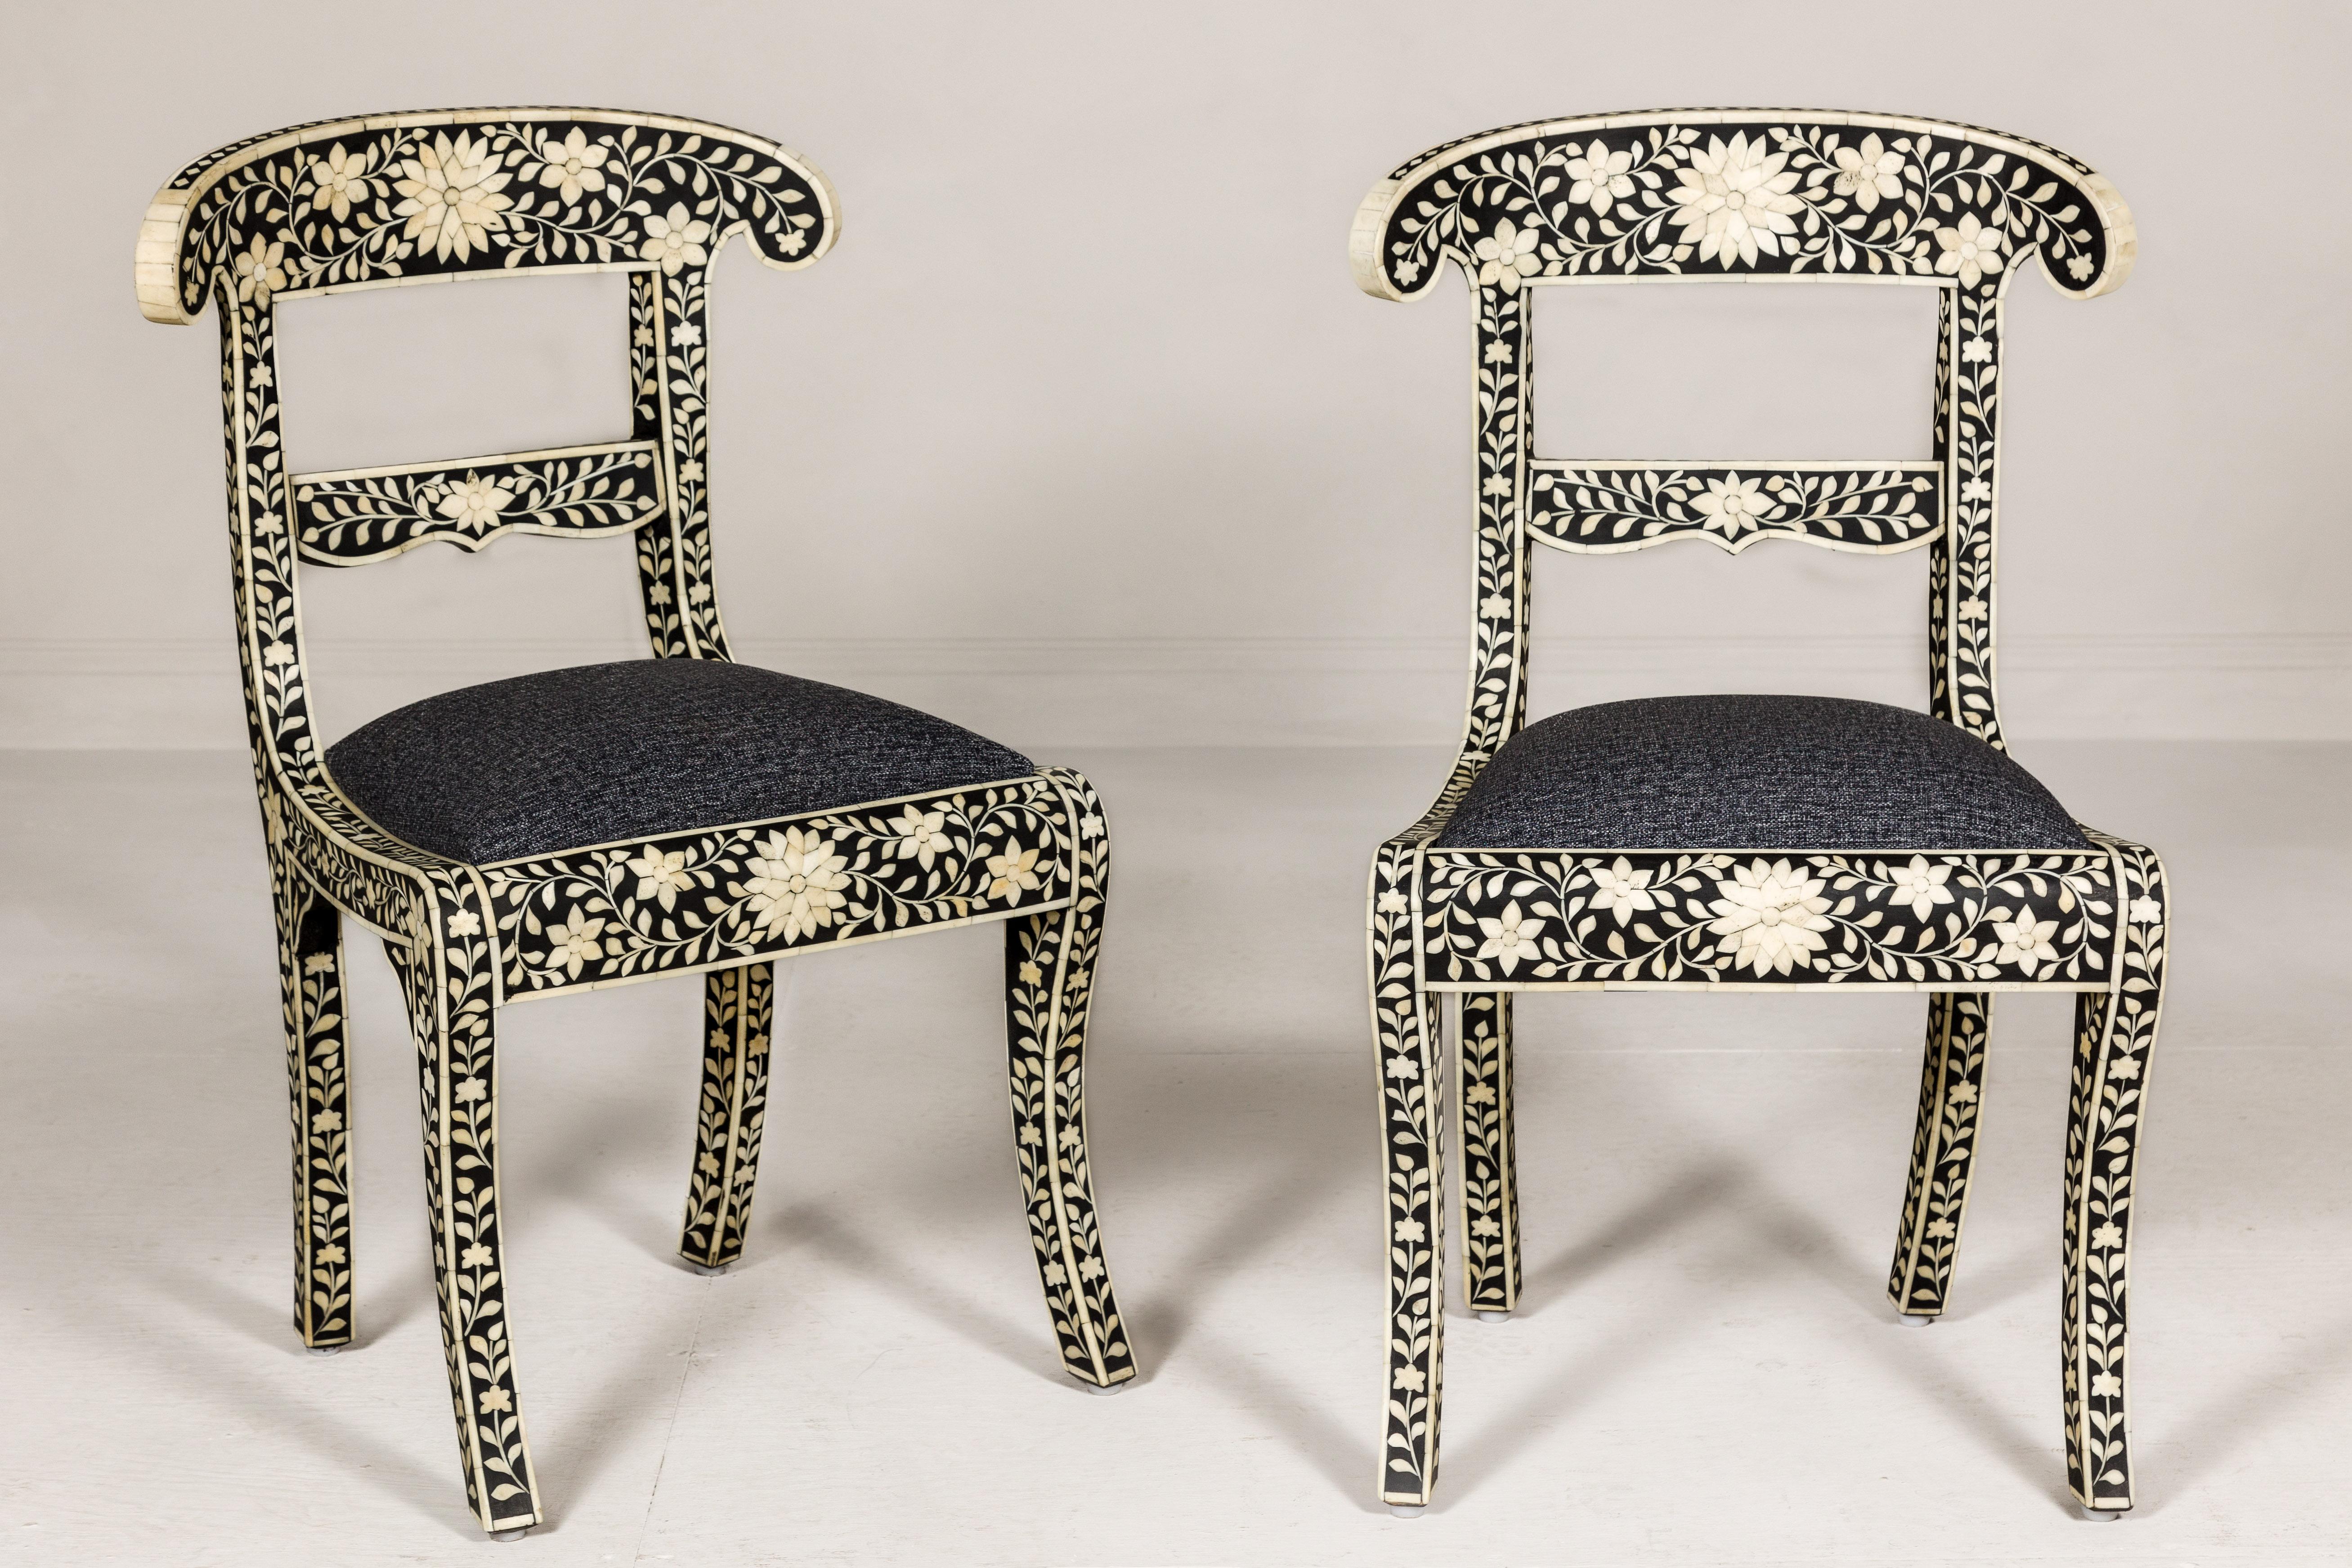 Anglo-Indian Style Ebonized Side Chairs with Floral Themed Bone Inlay, a Pair For Sale 1